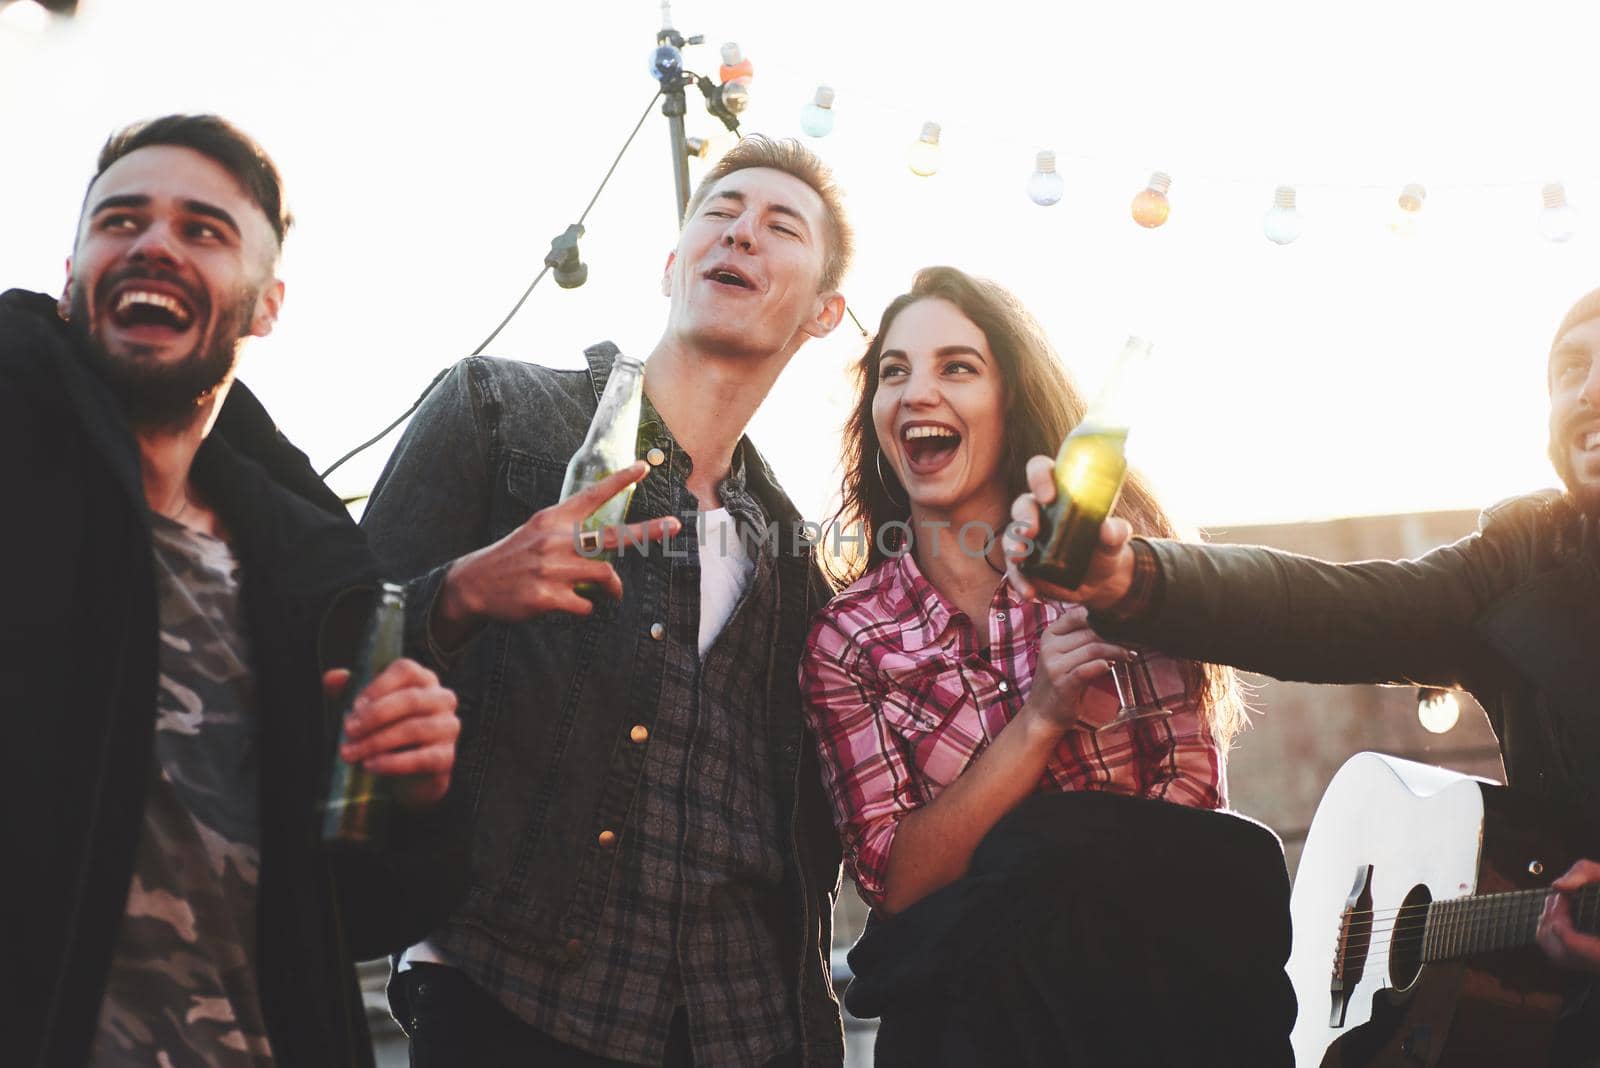 Gesturing and smiling. Group of young cheerful friends having fun while takes selfie on the roof with decorate light bulbs.